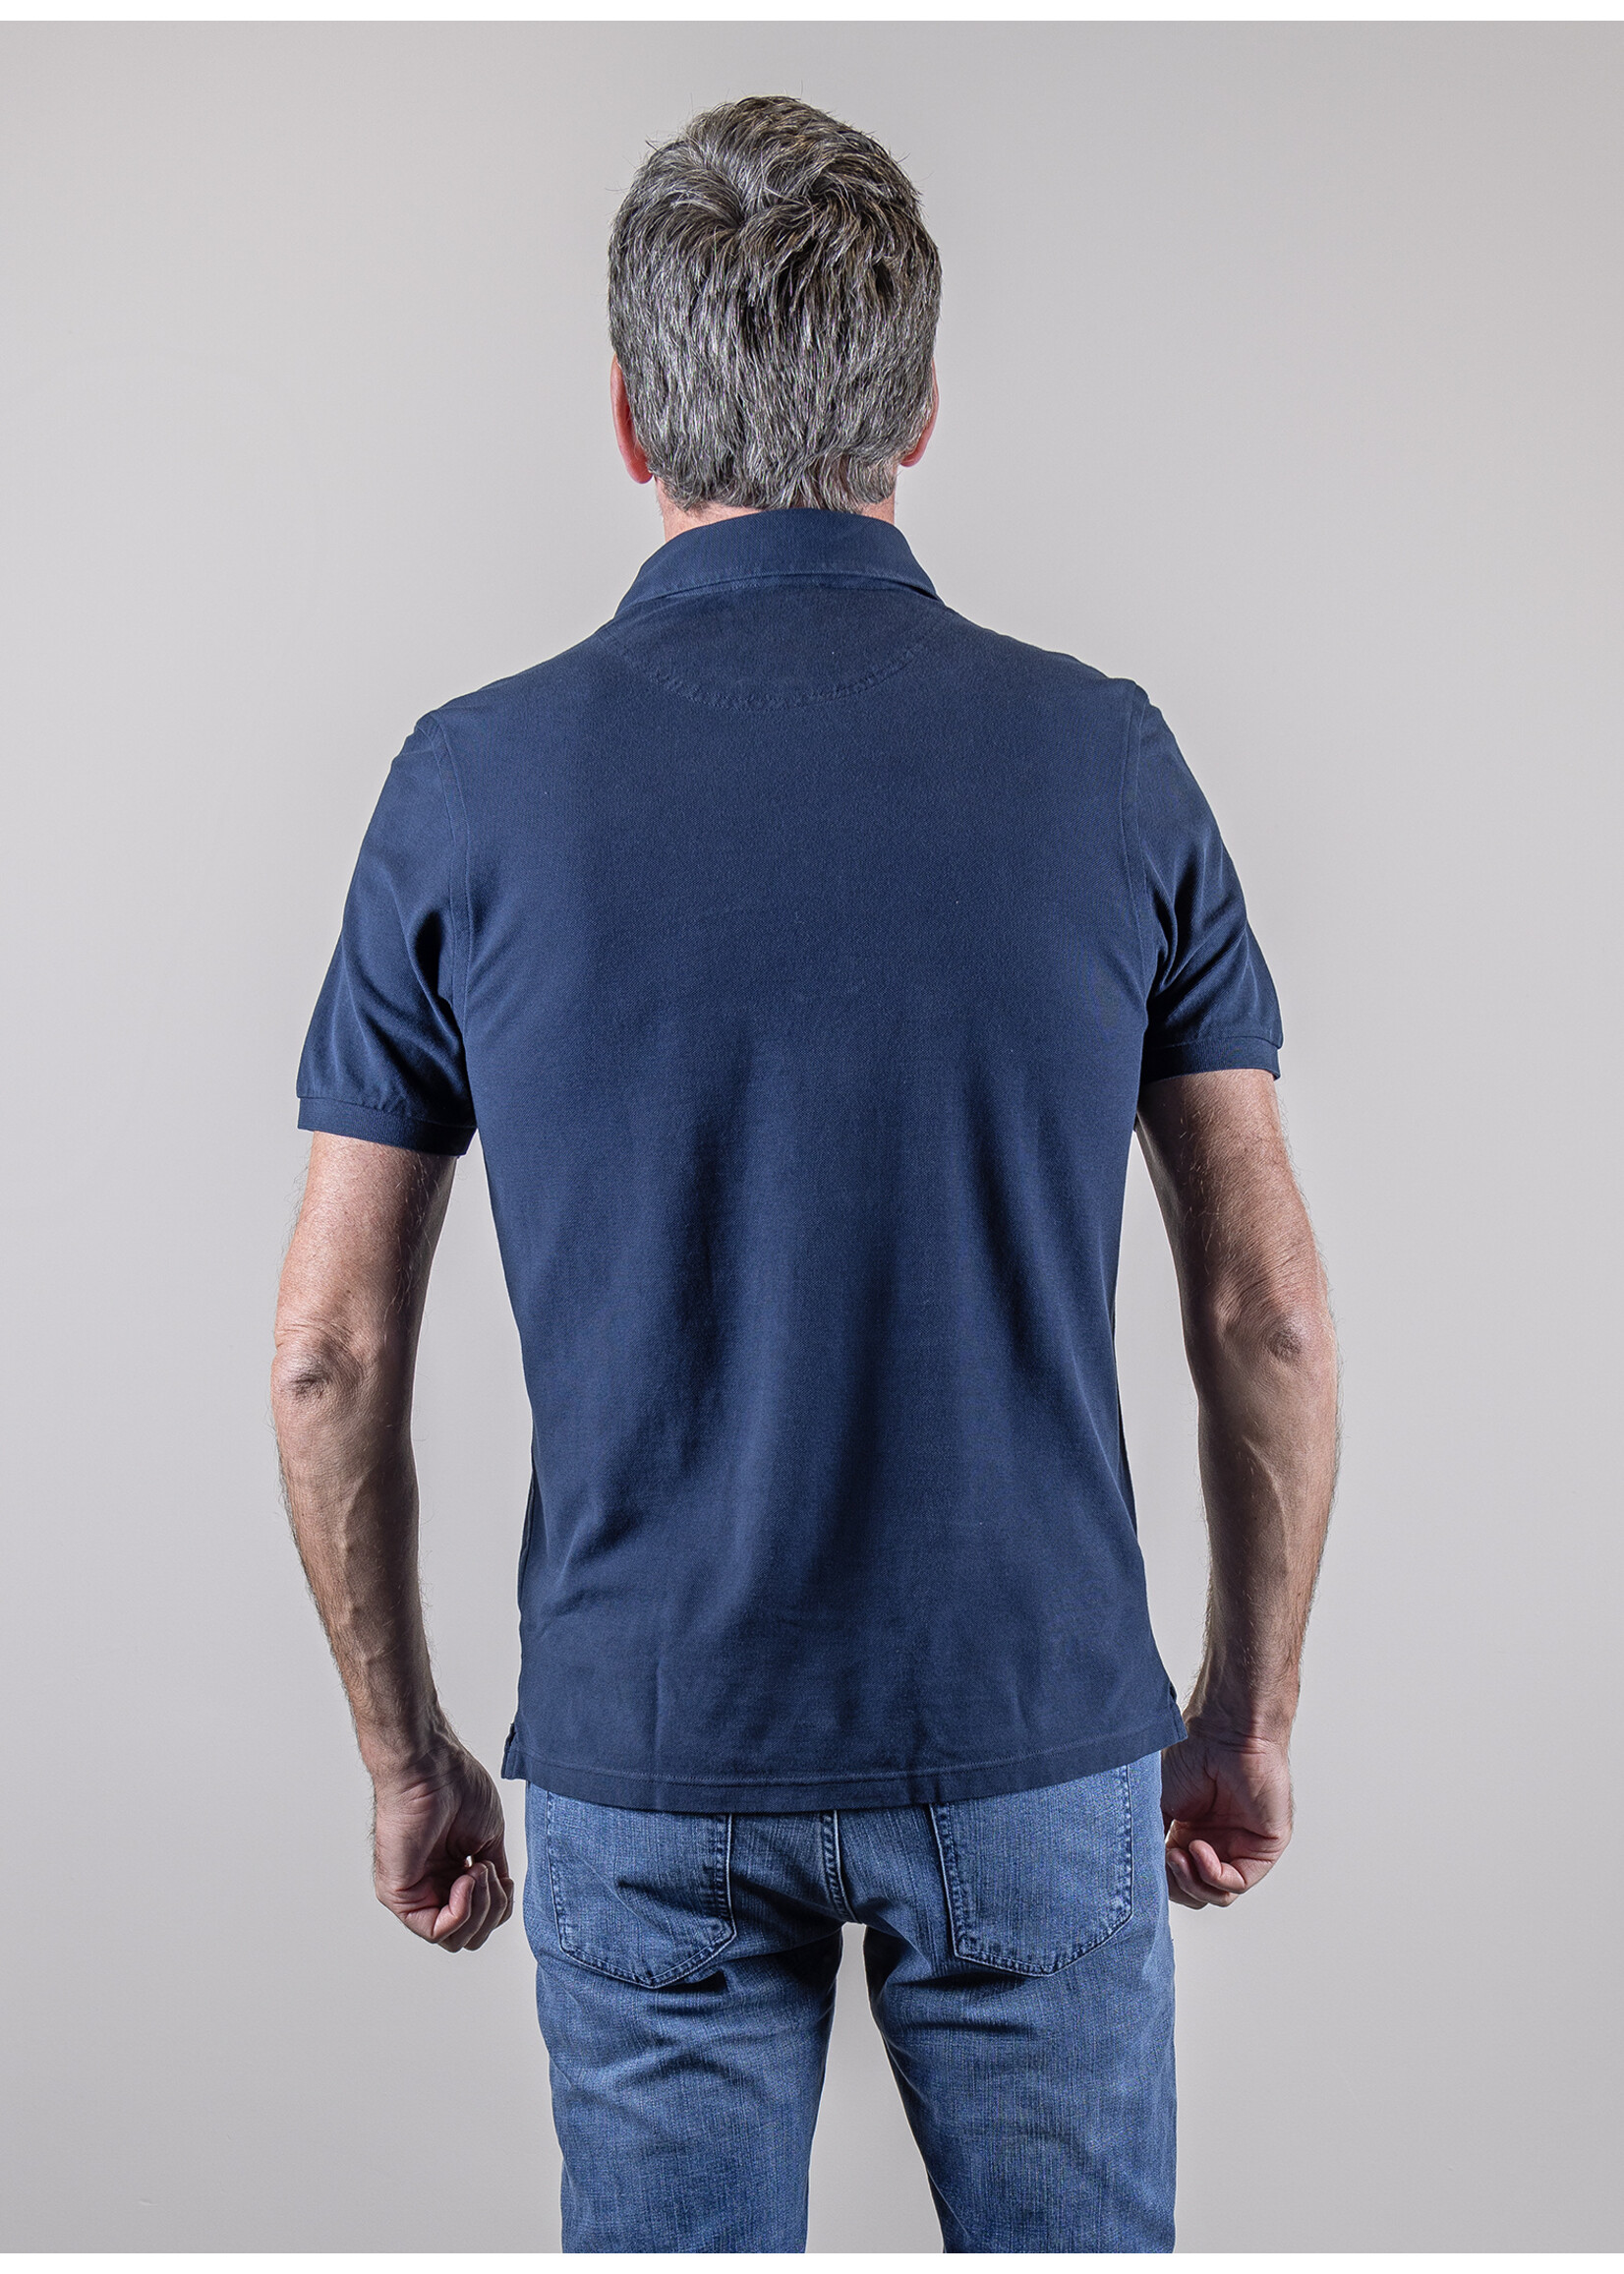 Ridiculous Classic Washed Cotton Polo Short Sleeve Navy